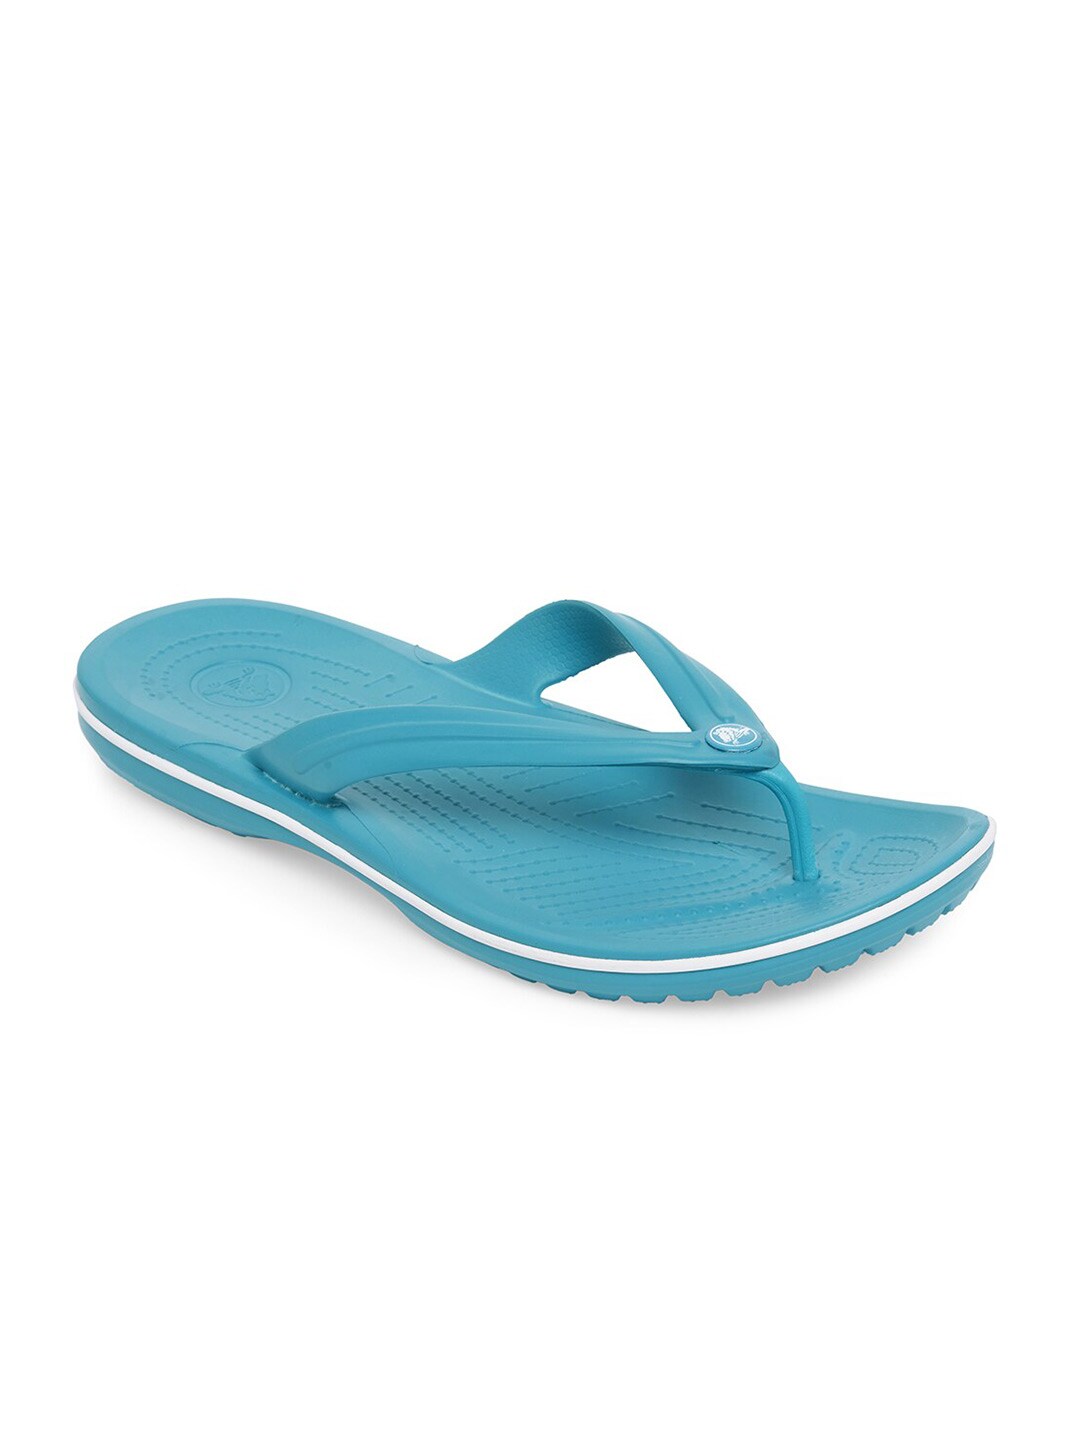 Crocs Unisex Turquoise Blue Solid Thong Flip-Flops Price in India